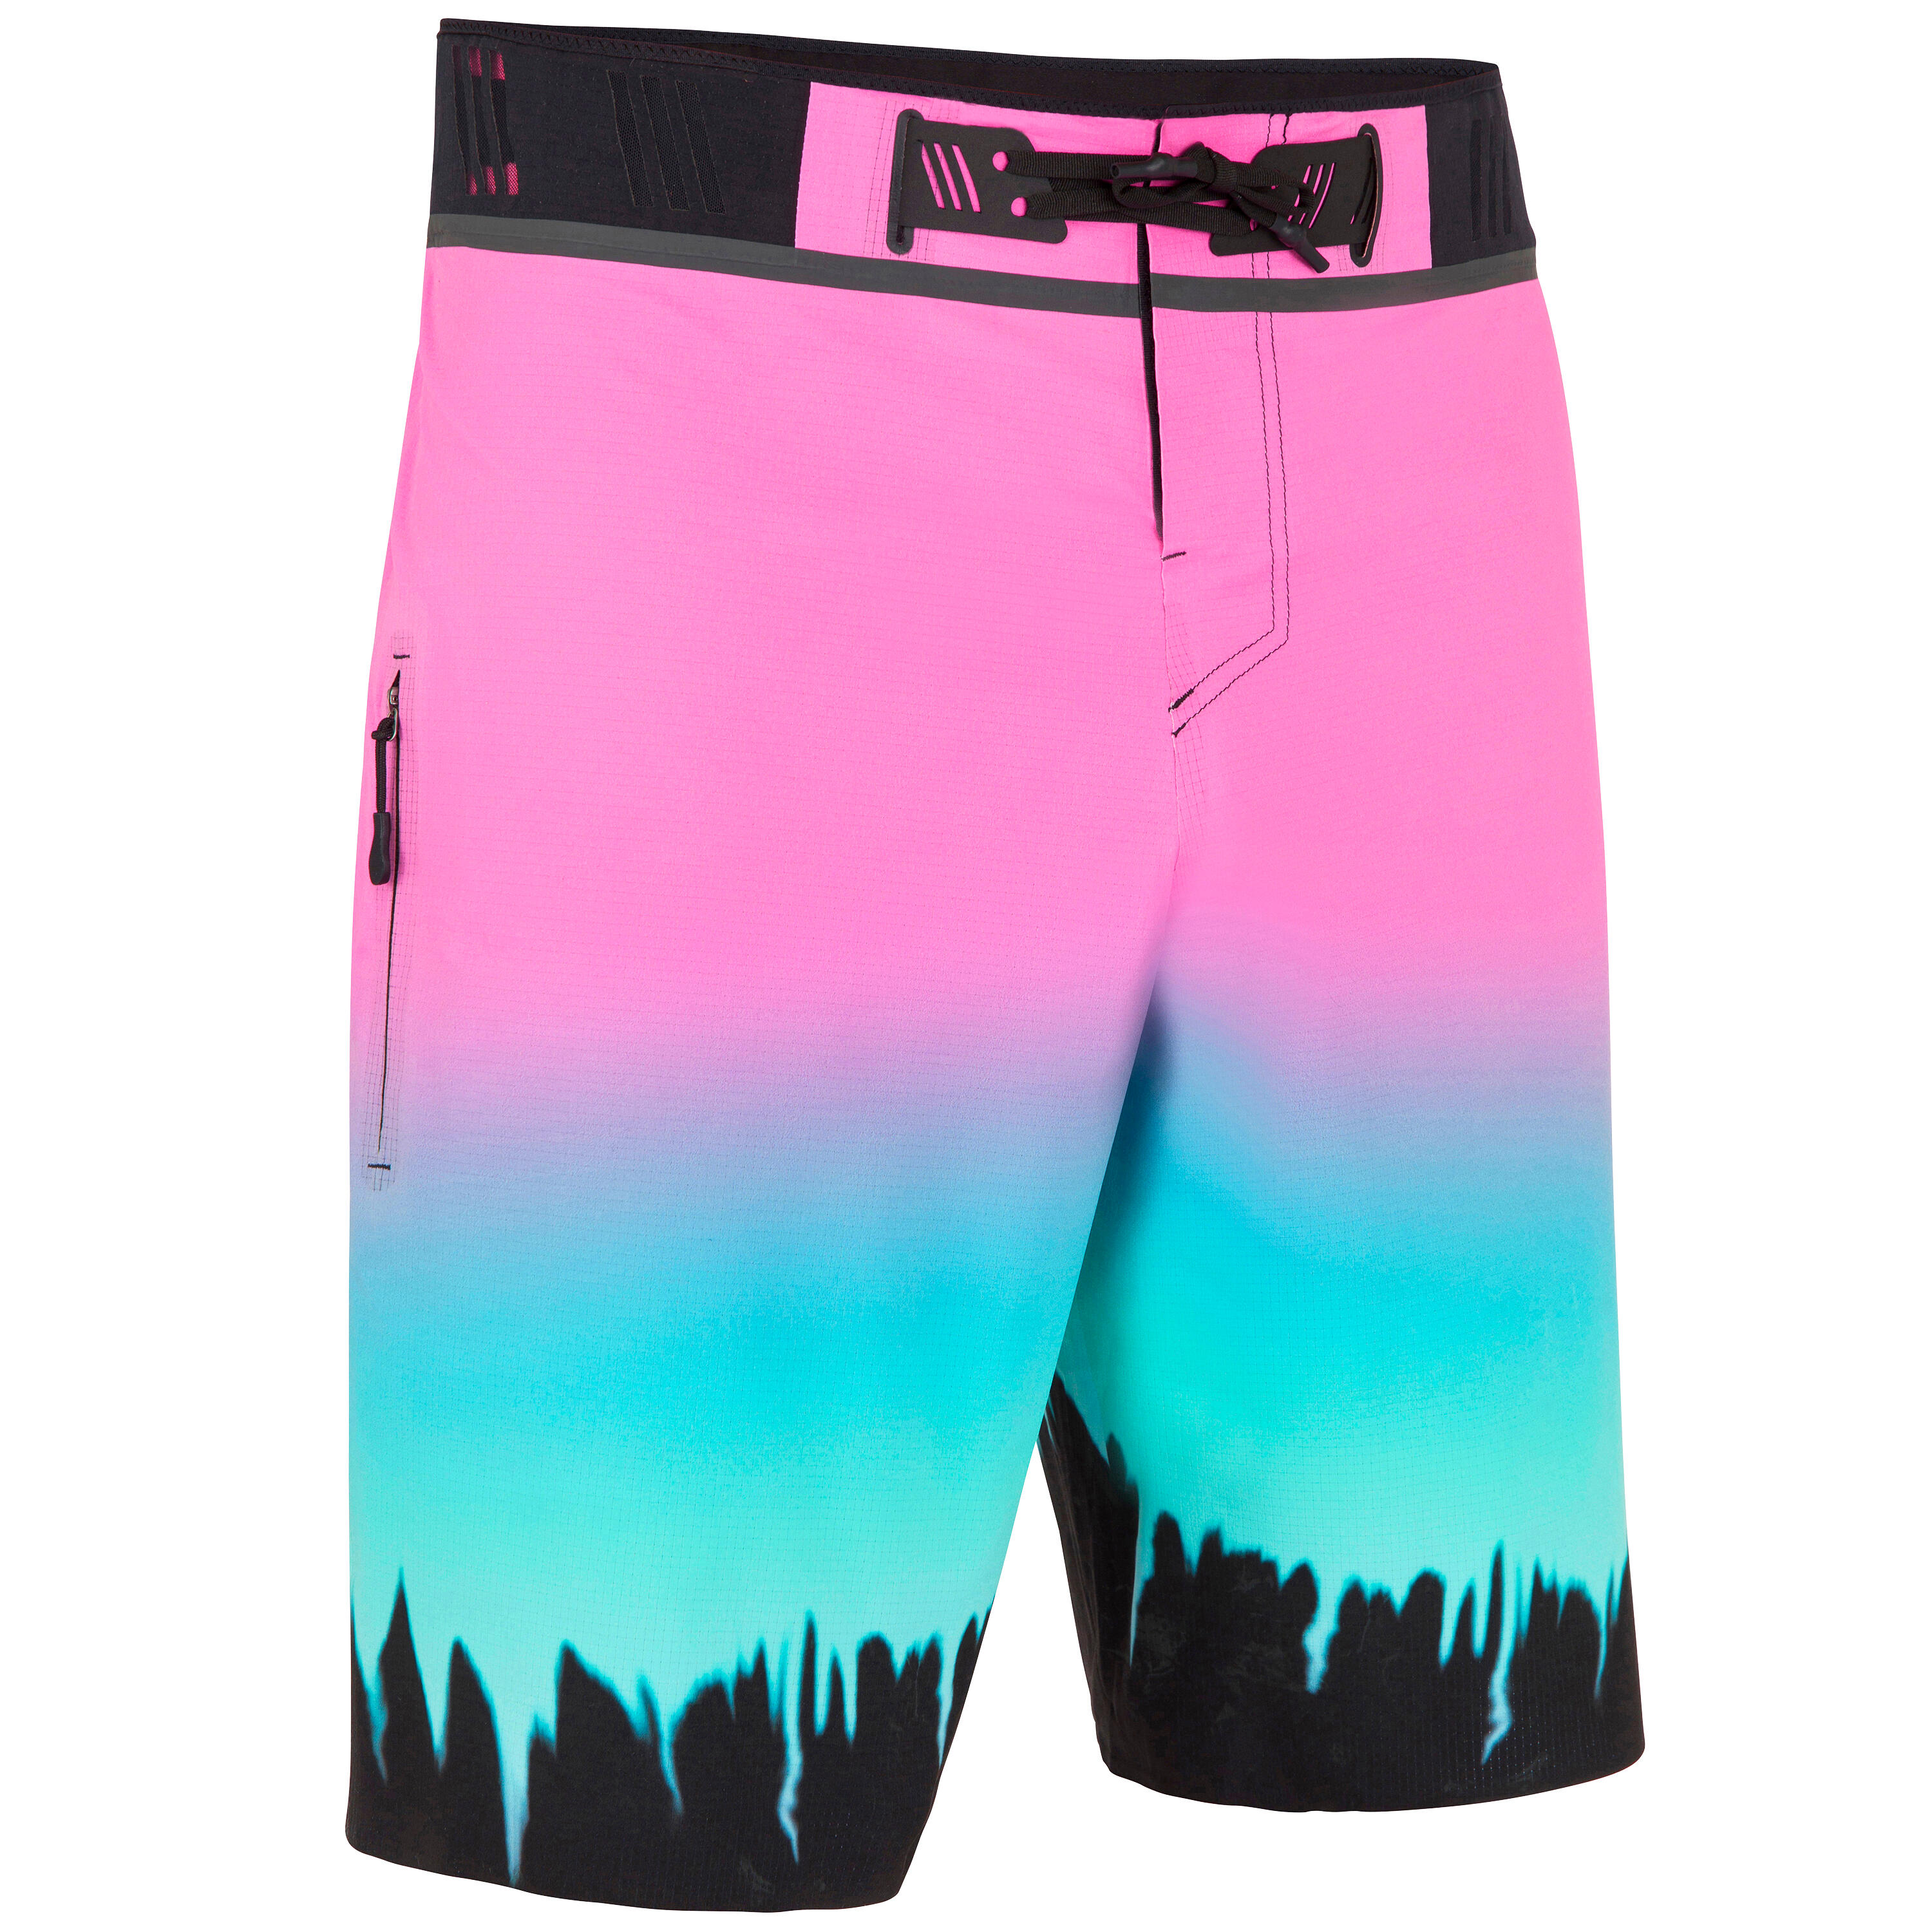 Long Surfing Boardshorts 900 - Grungy Pink. 1/12